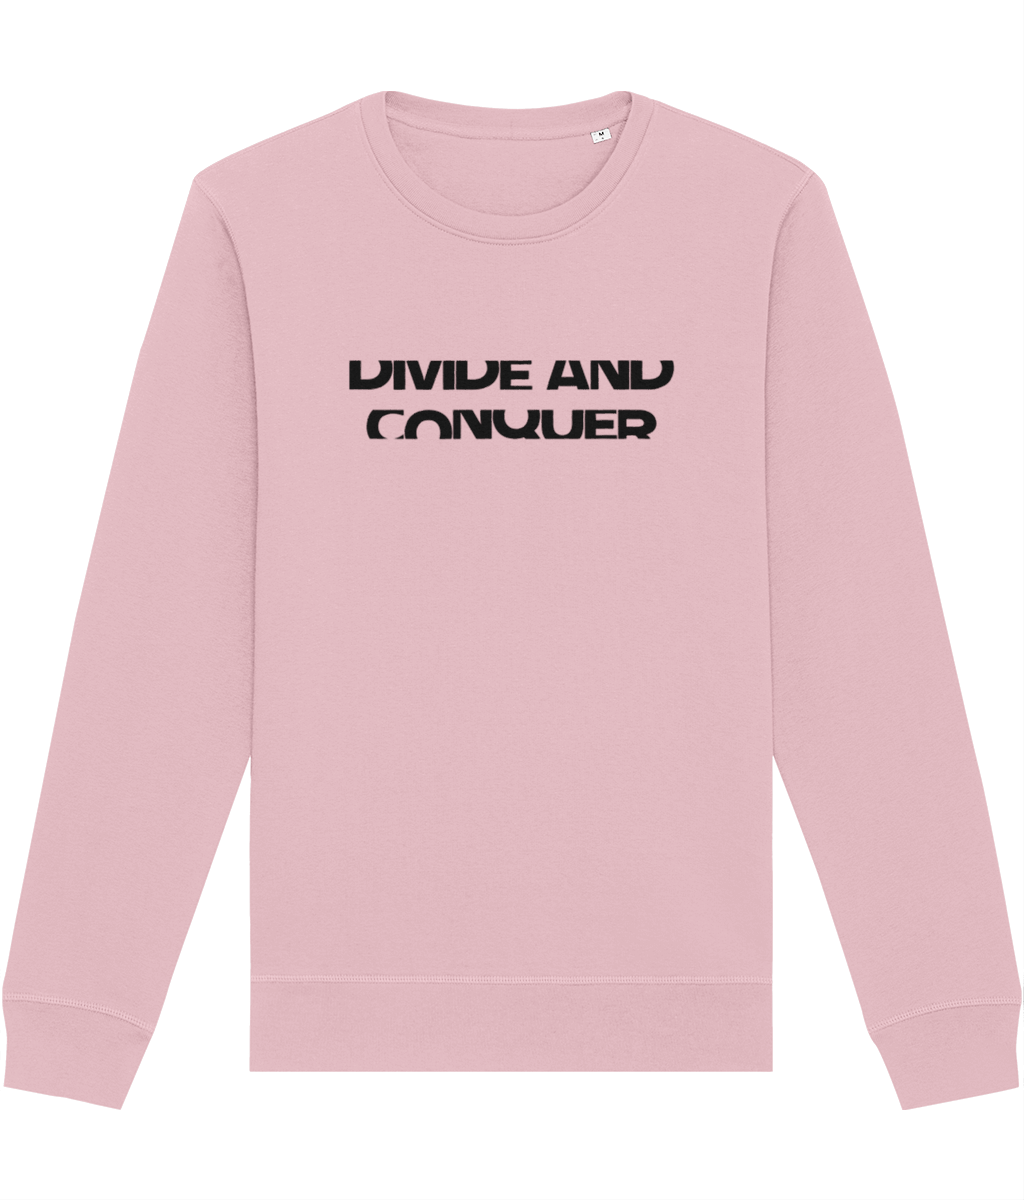 Contemporary 'Divide & Conquer' Organic Cotton Sweatshirt - Divide And Conquer